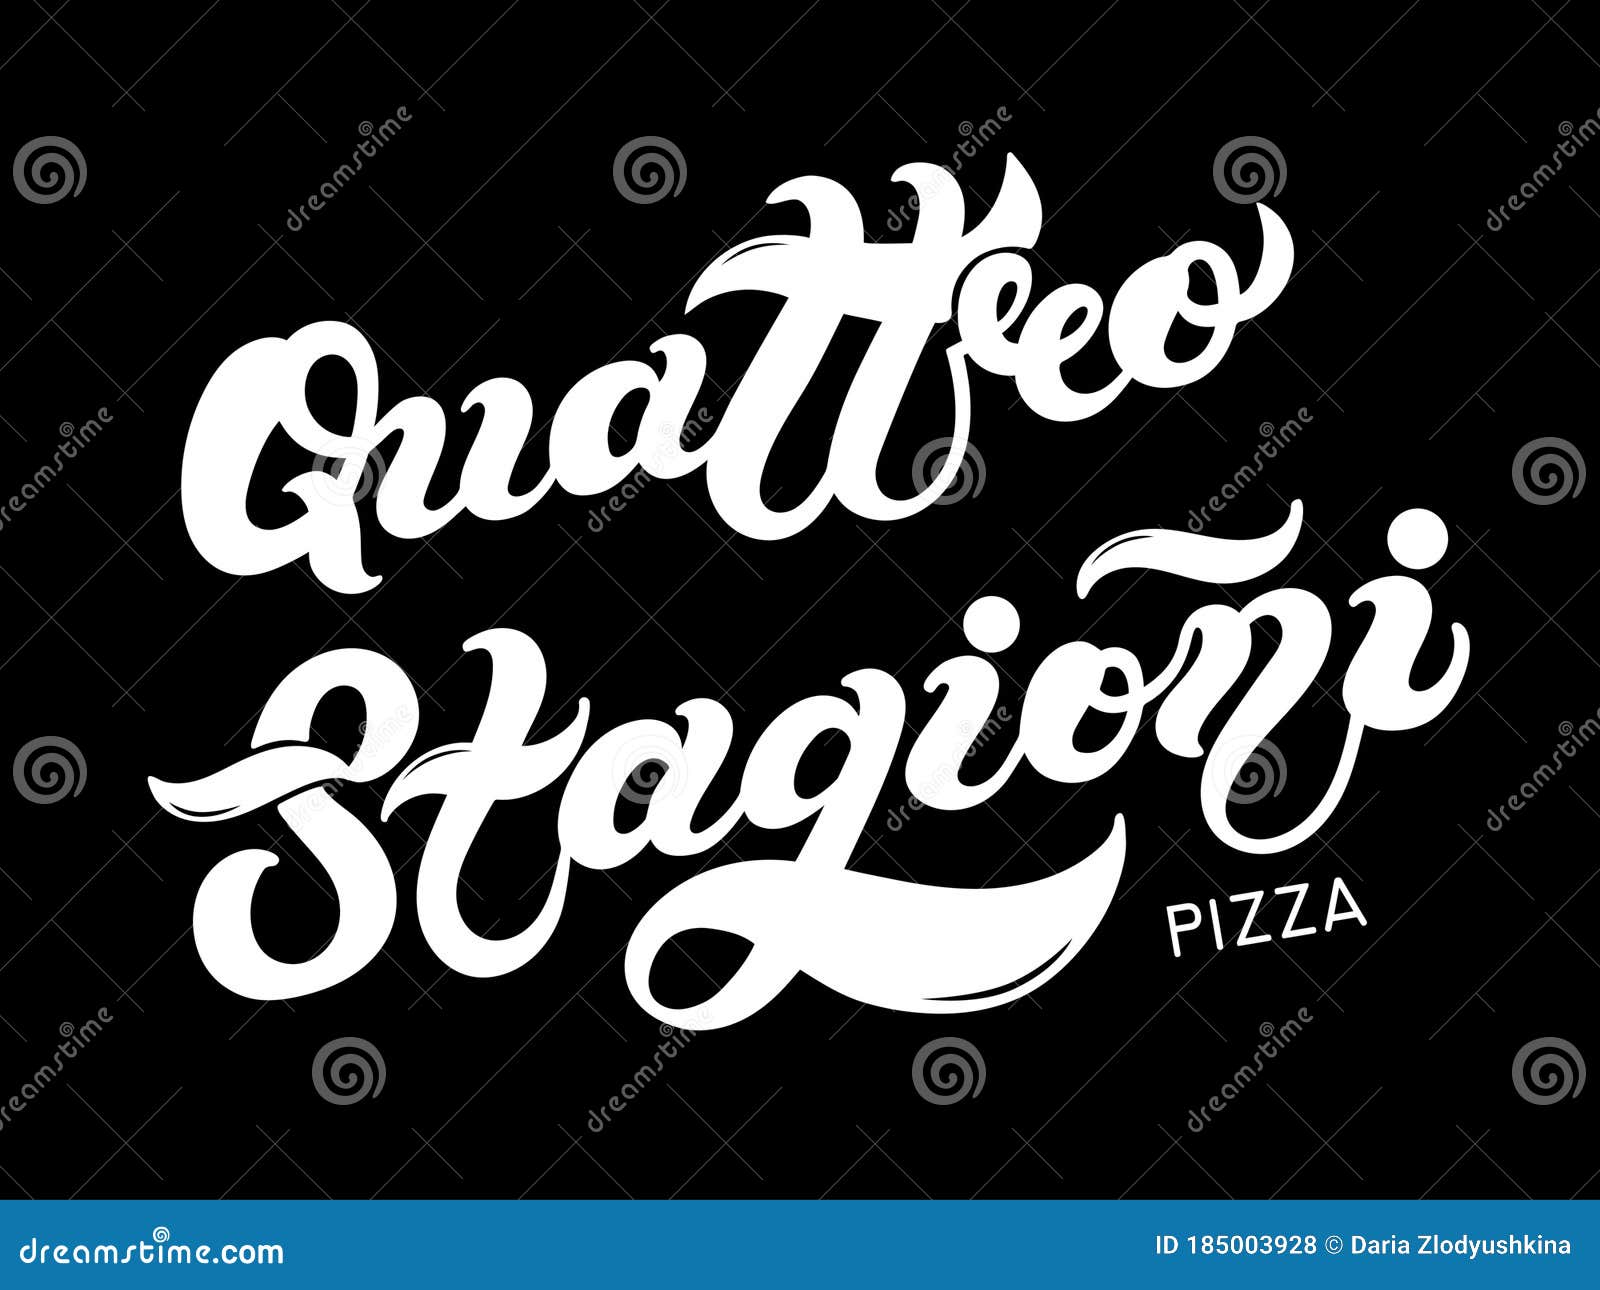 pizza quattro stagioni. the name of the type of pizza in italian. hand drawn lettering